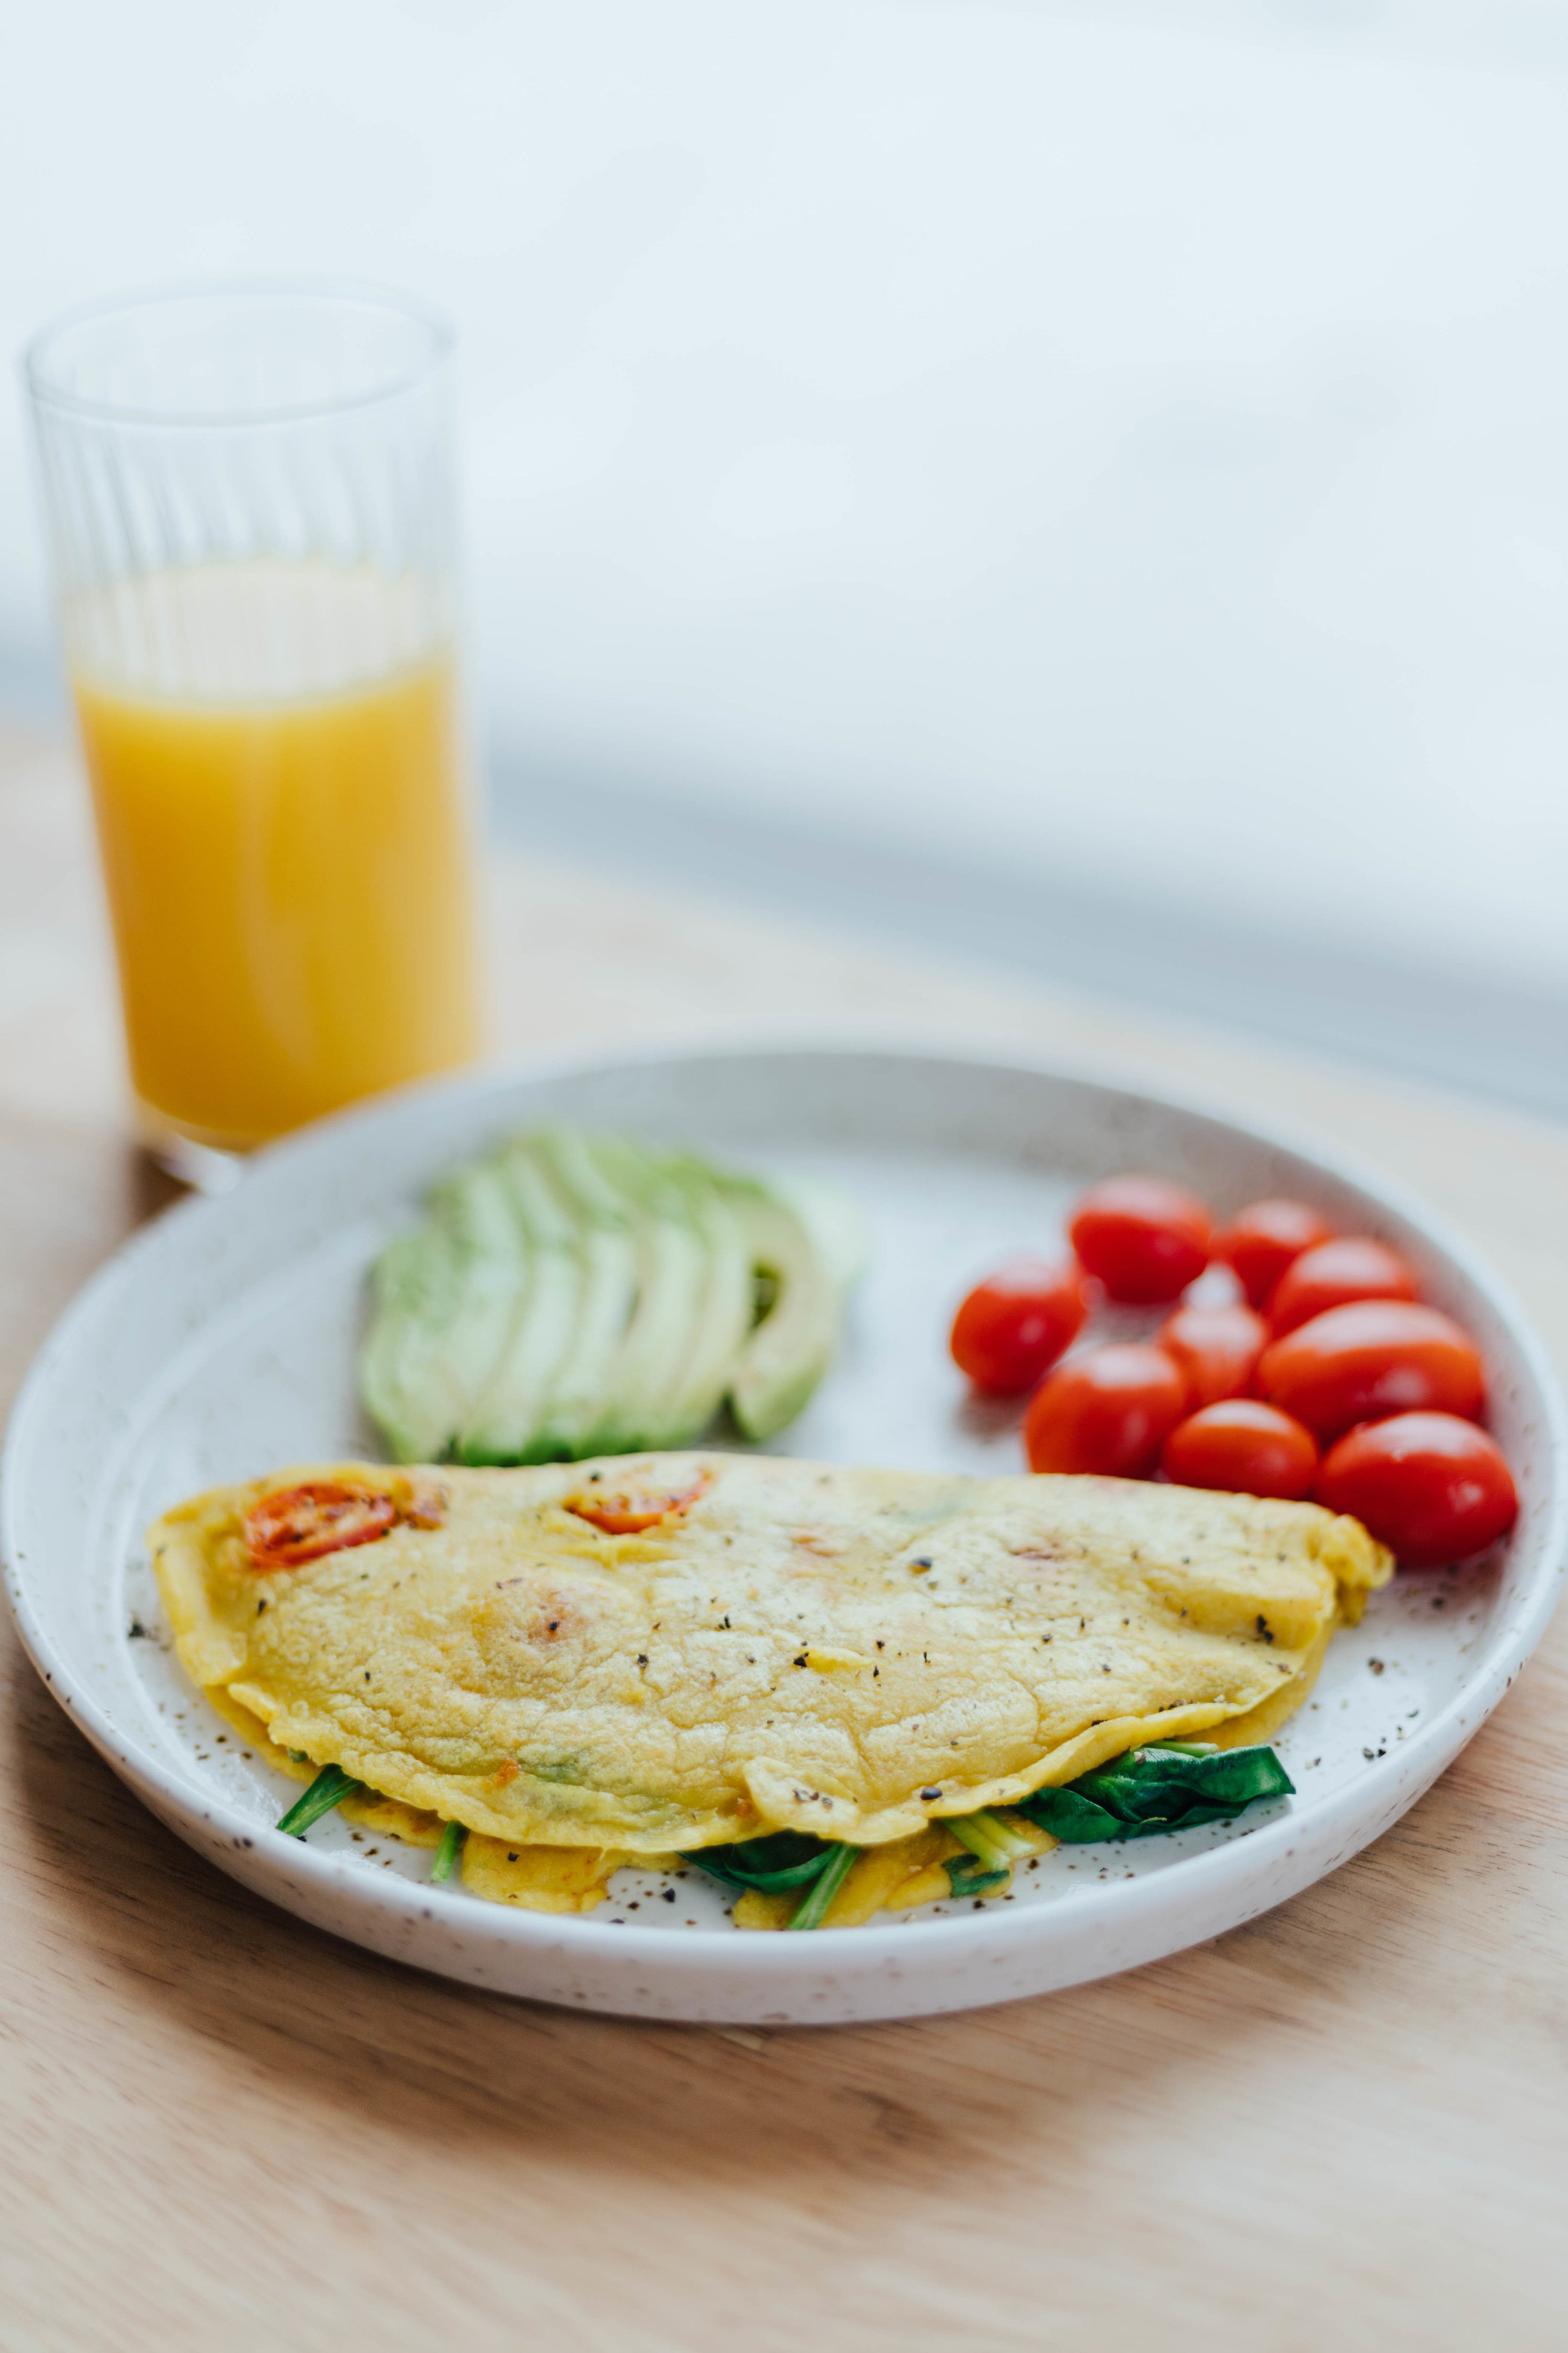 Peggs can be used to make an egg free vegan omelette